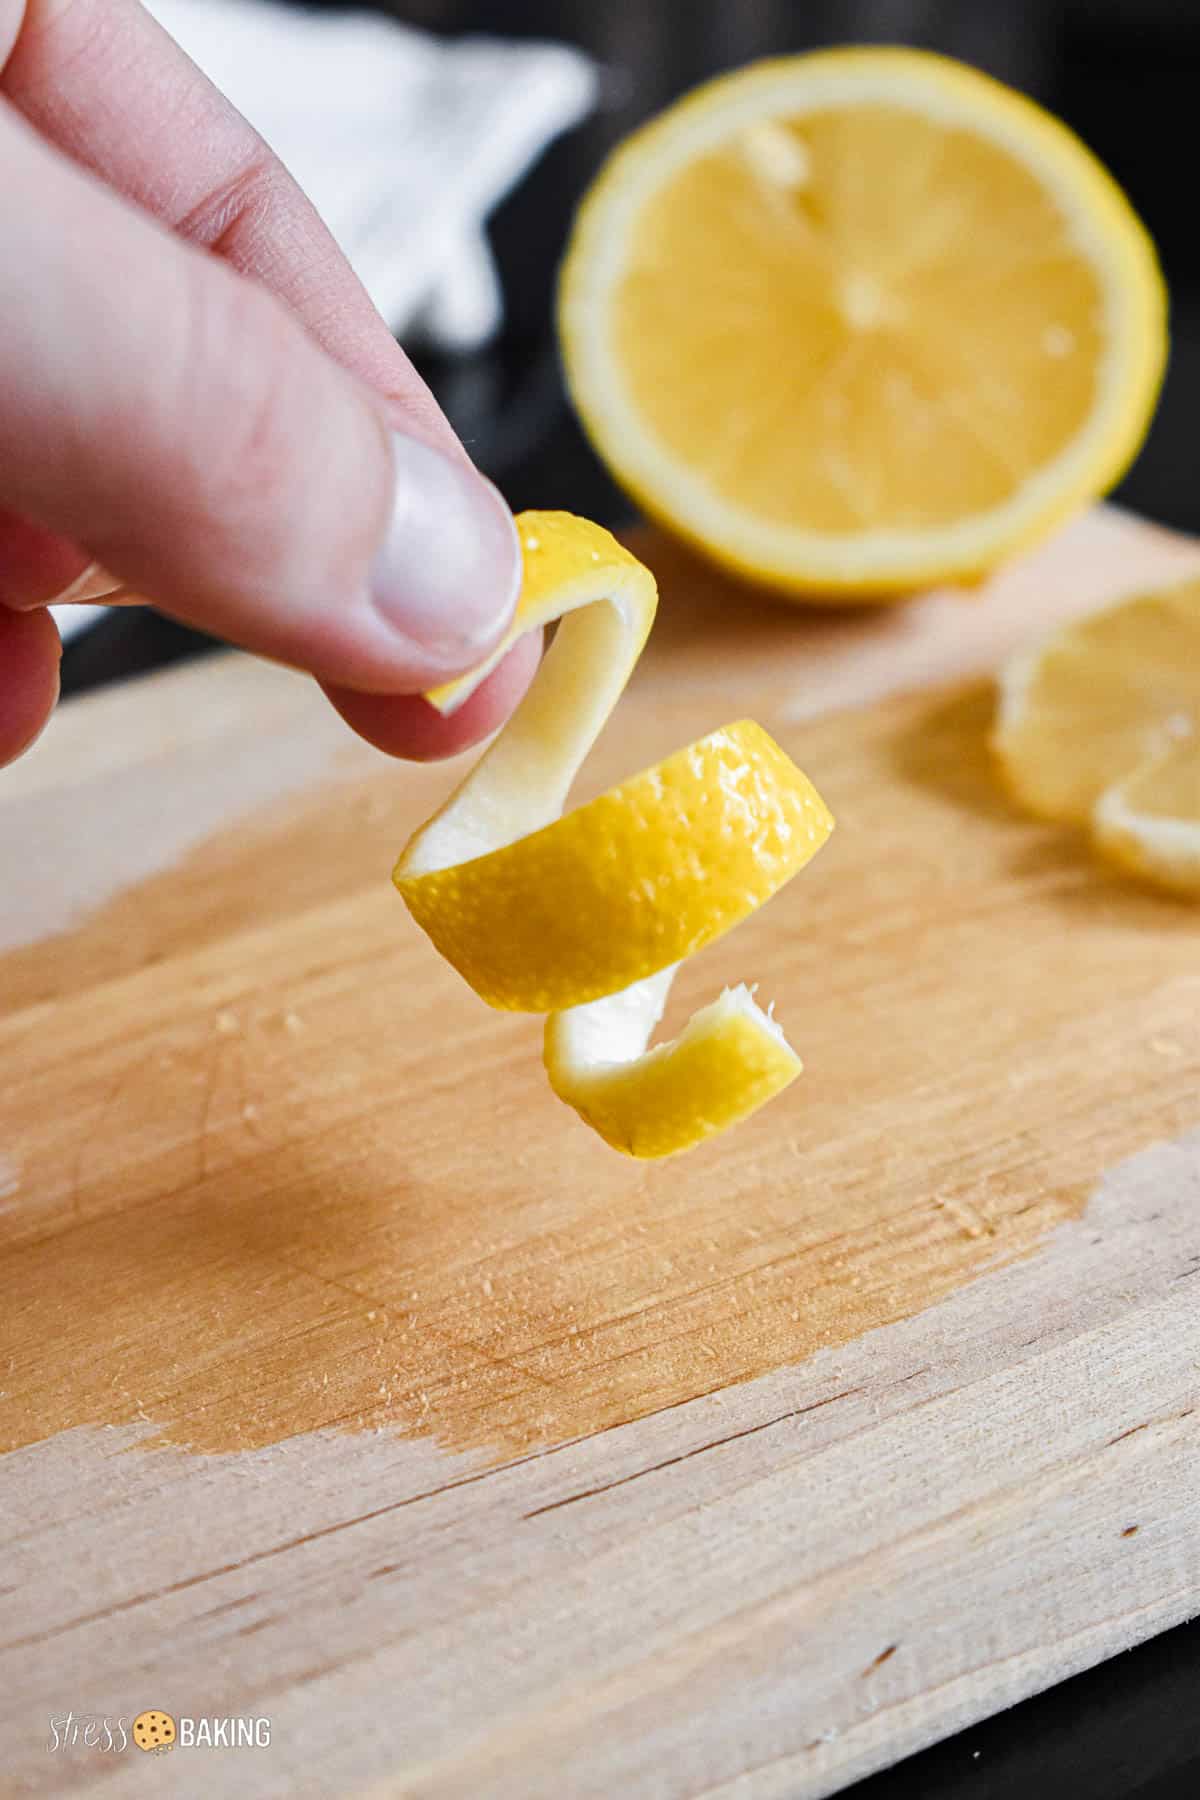 A curl of lemon twist garnish being held above a small wooden cutting board